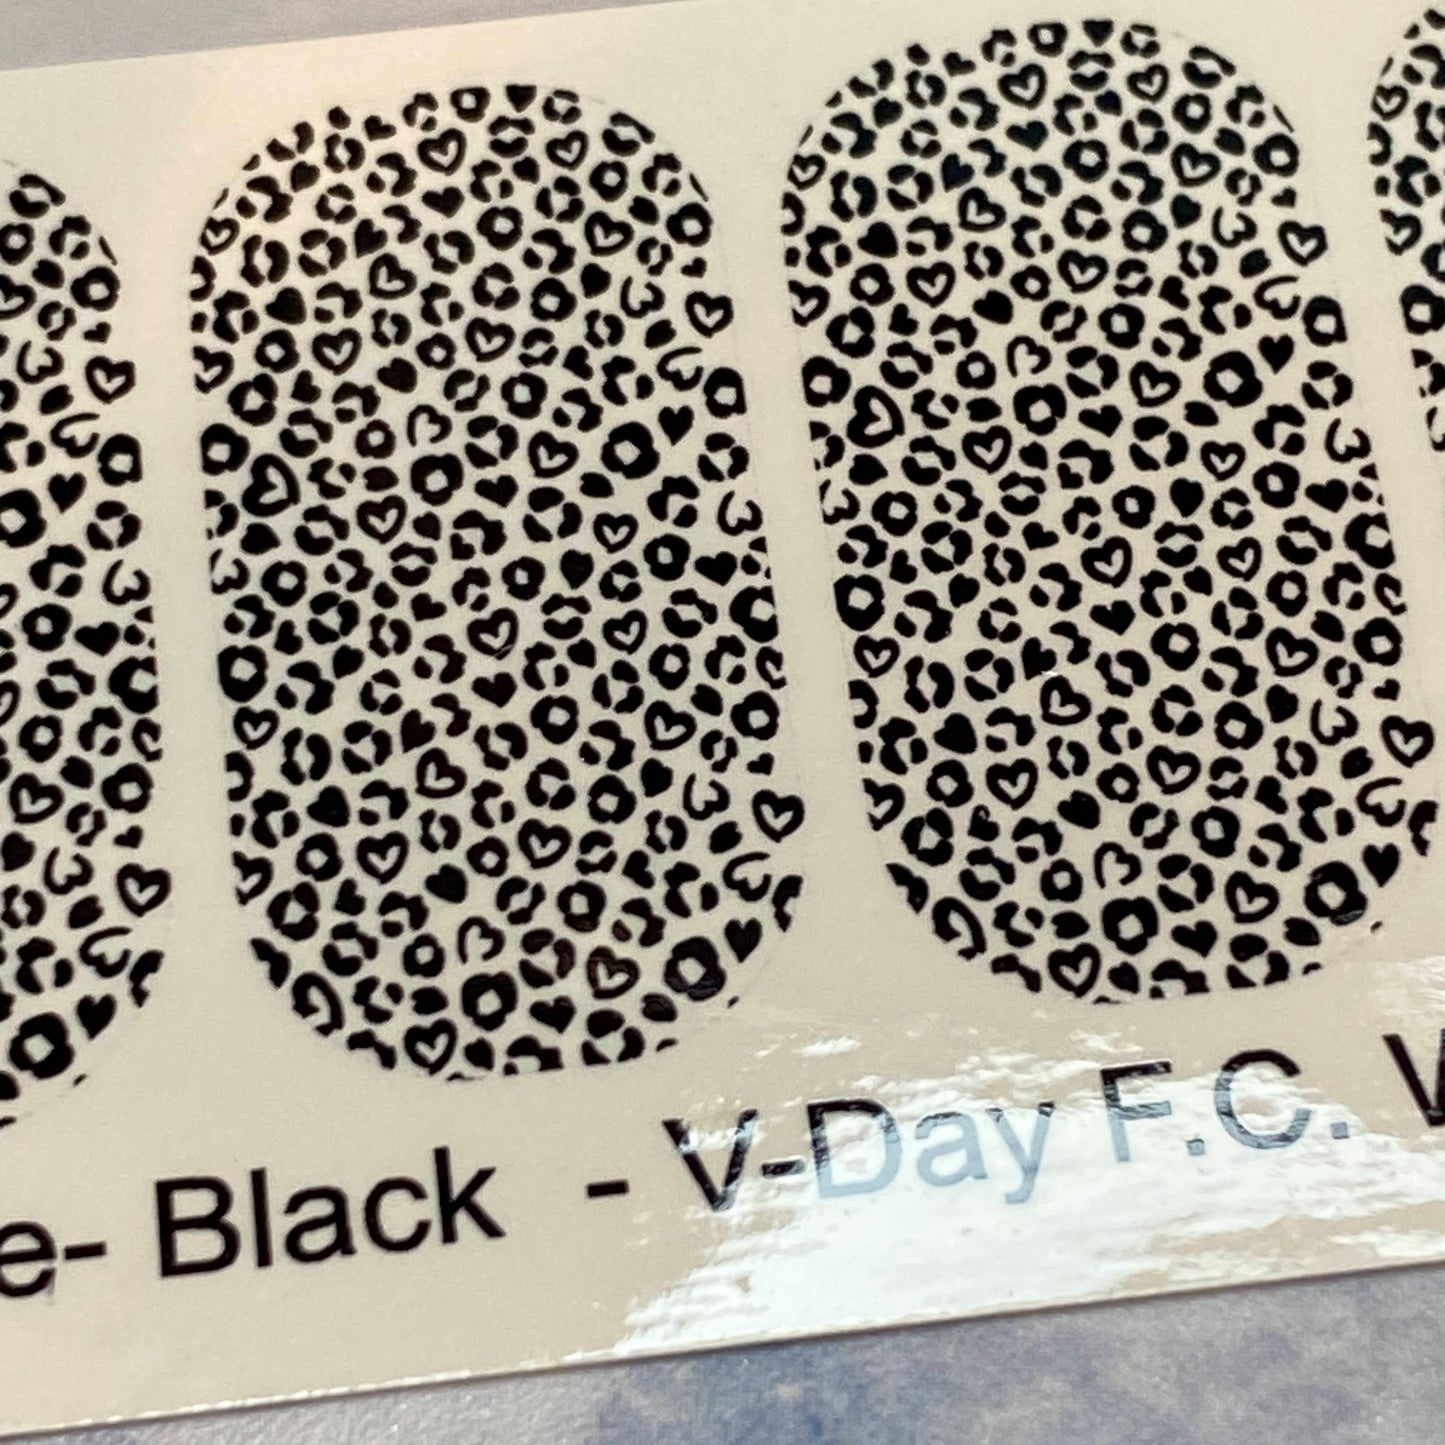 Valentines Day-  Black Leopard Print  -  Full Coverage- Decals For Nails